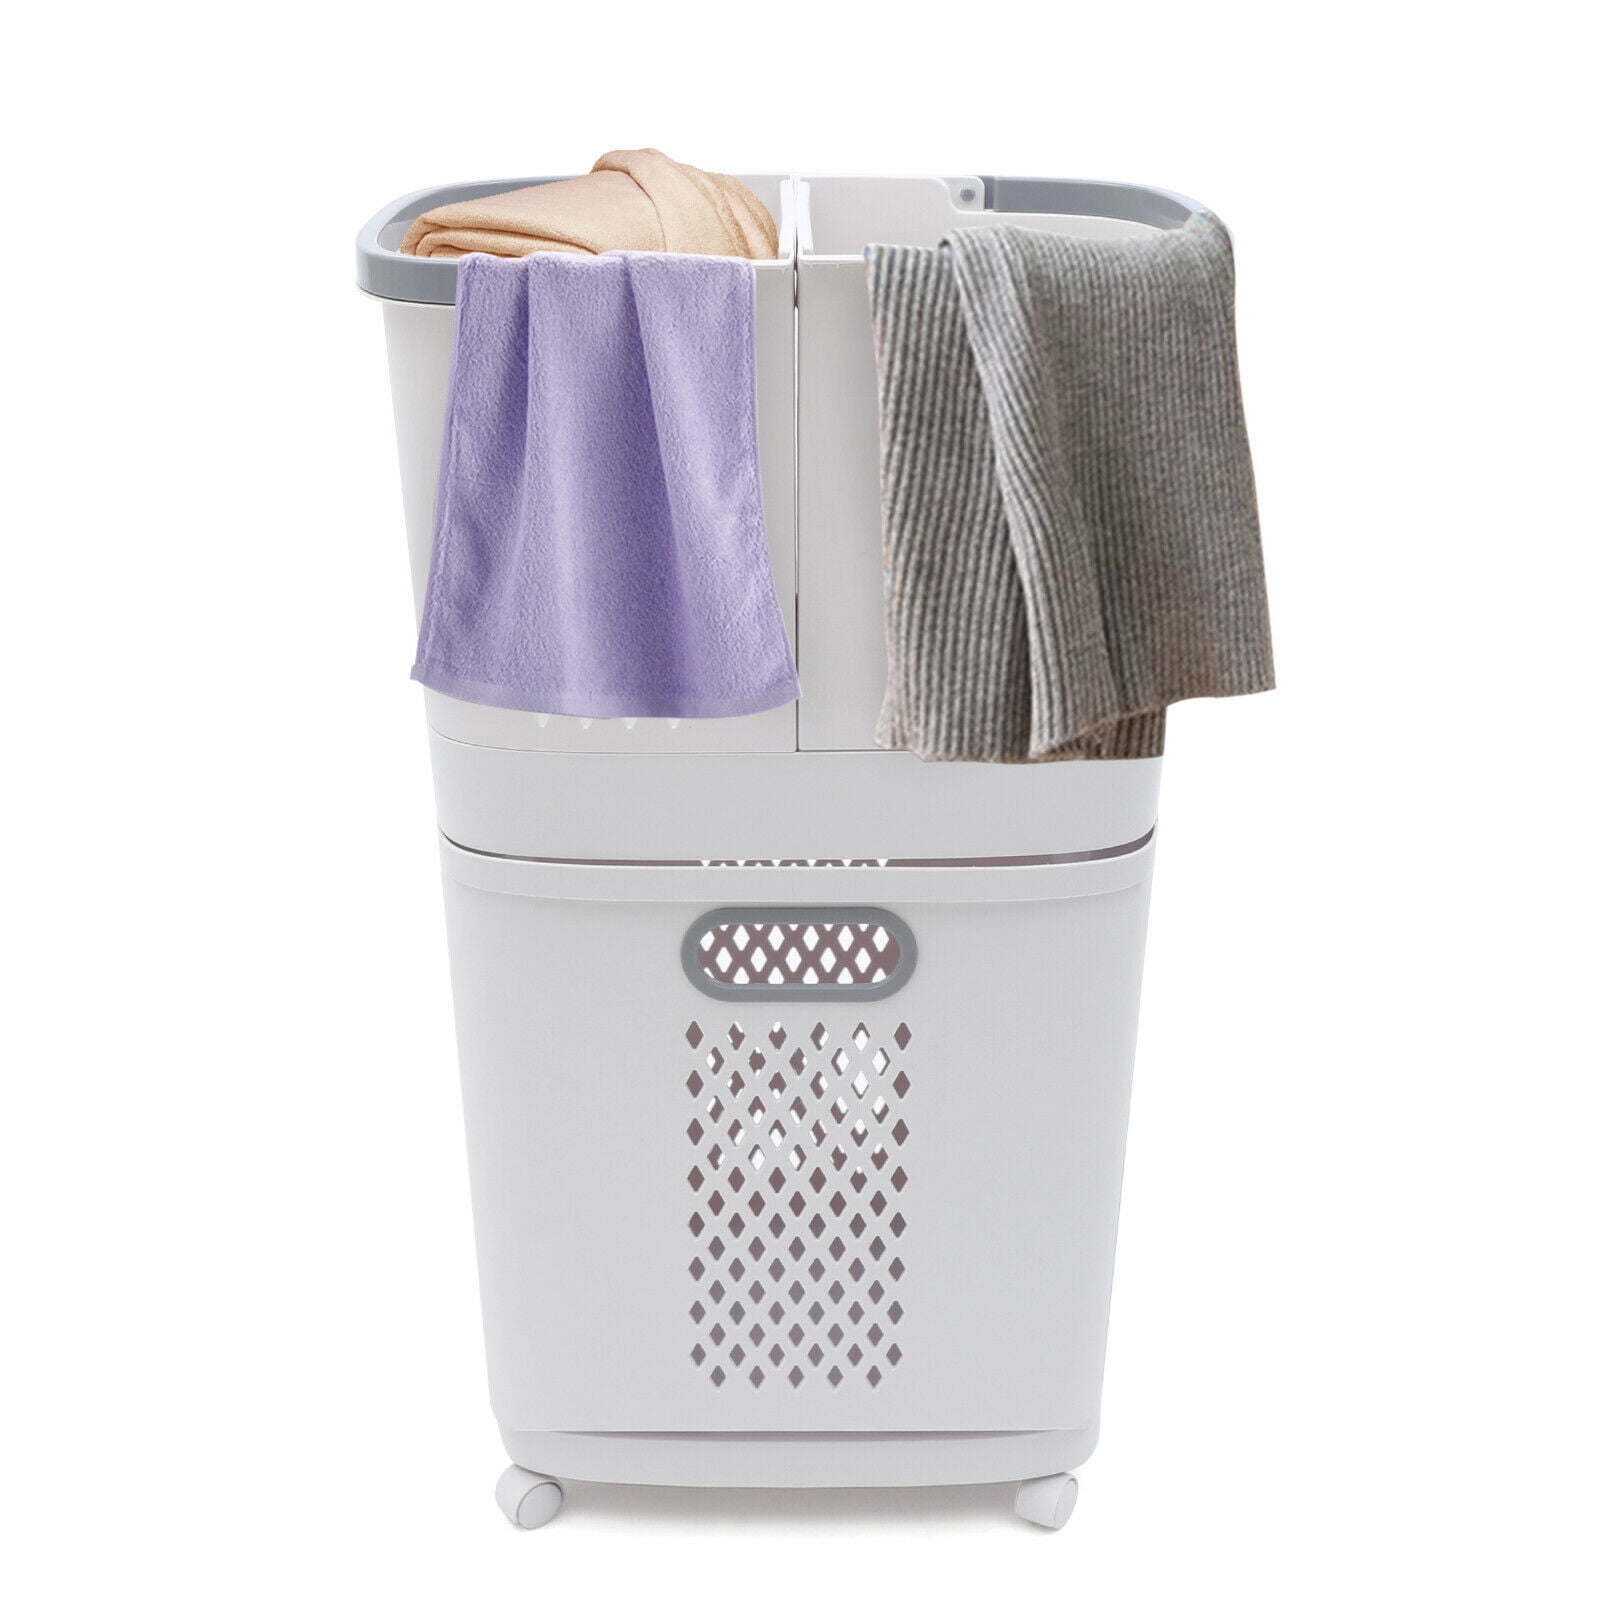 pupustar Laundry Basket with Wheels,Rolling Collapsible Laundry